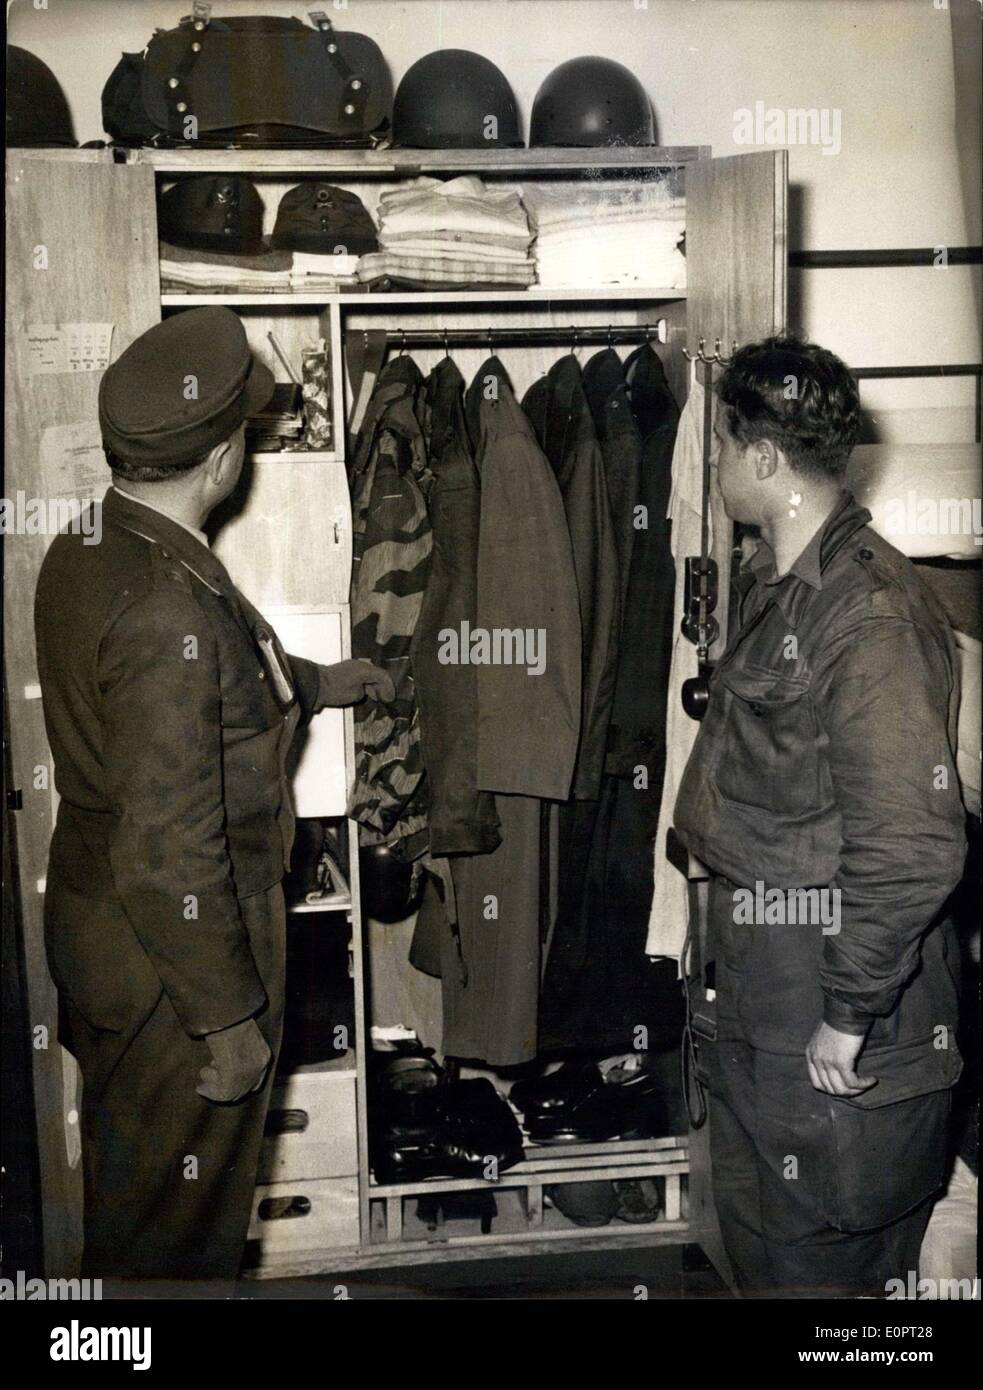 Nov. 29, 1956 - Inspection of the locker: The Barracks of the first German division of the alpine troops are at Mittenwald Germ Stock Photo